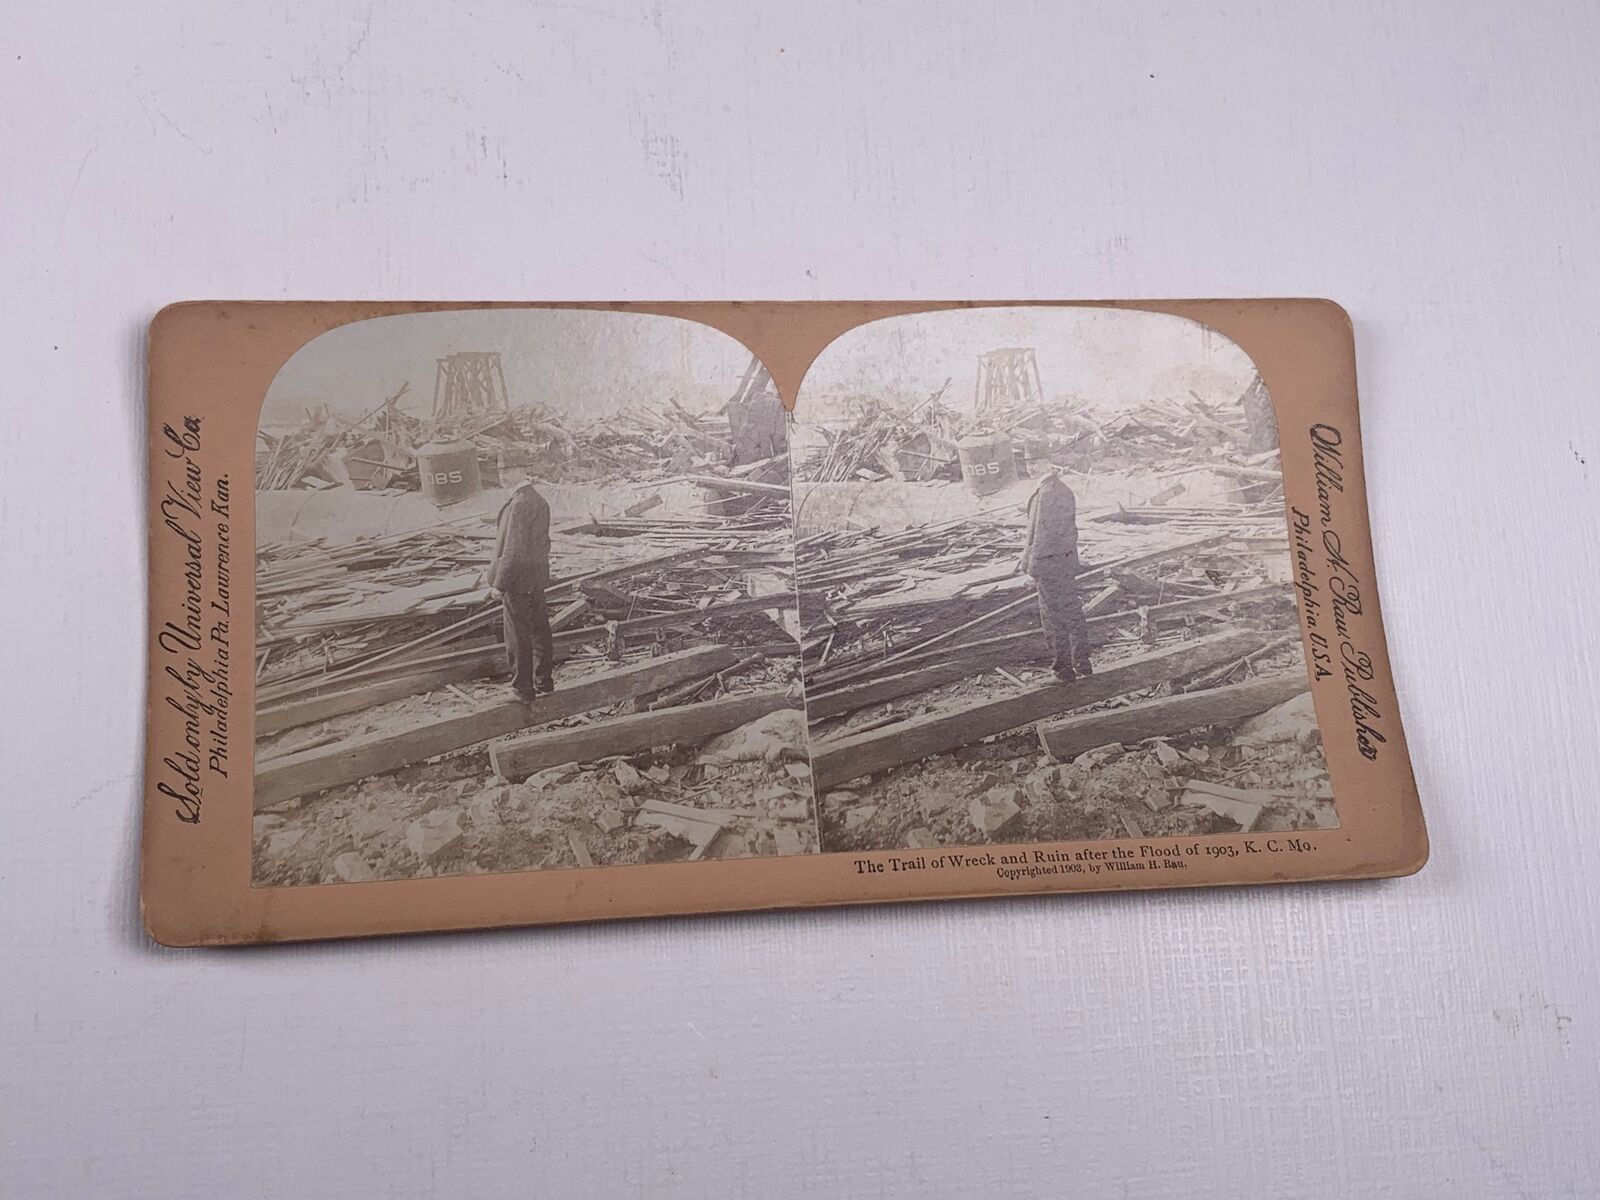  Universal Stereoview Photo Trail Wreck Ruin After Flood 1903 KC MO 